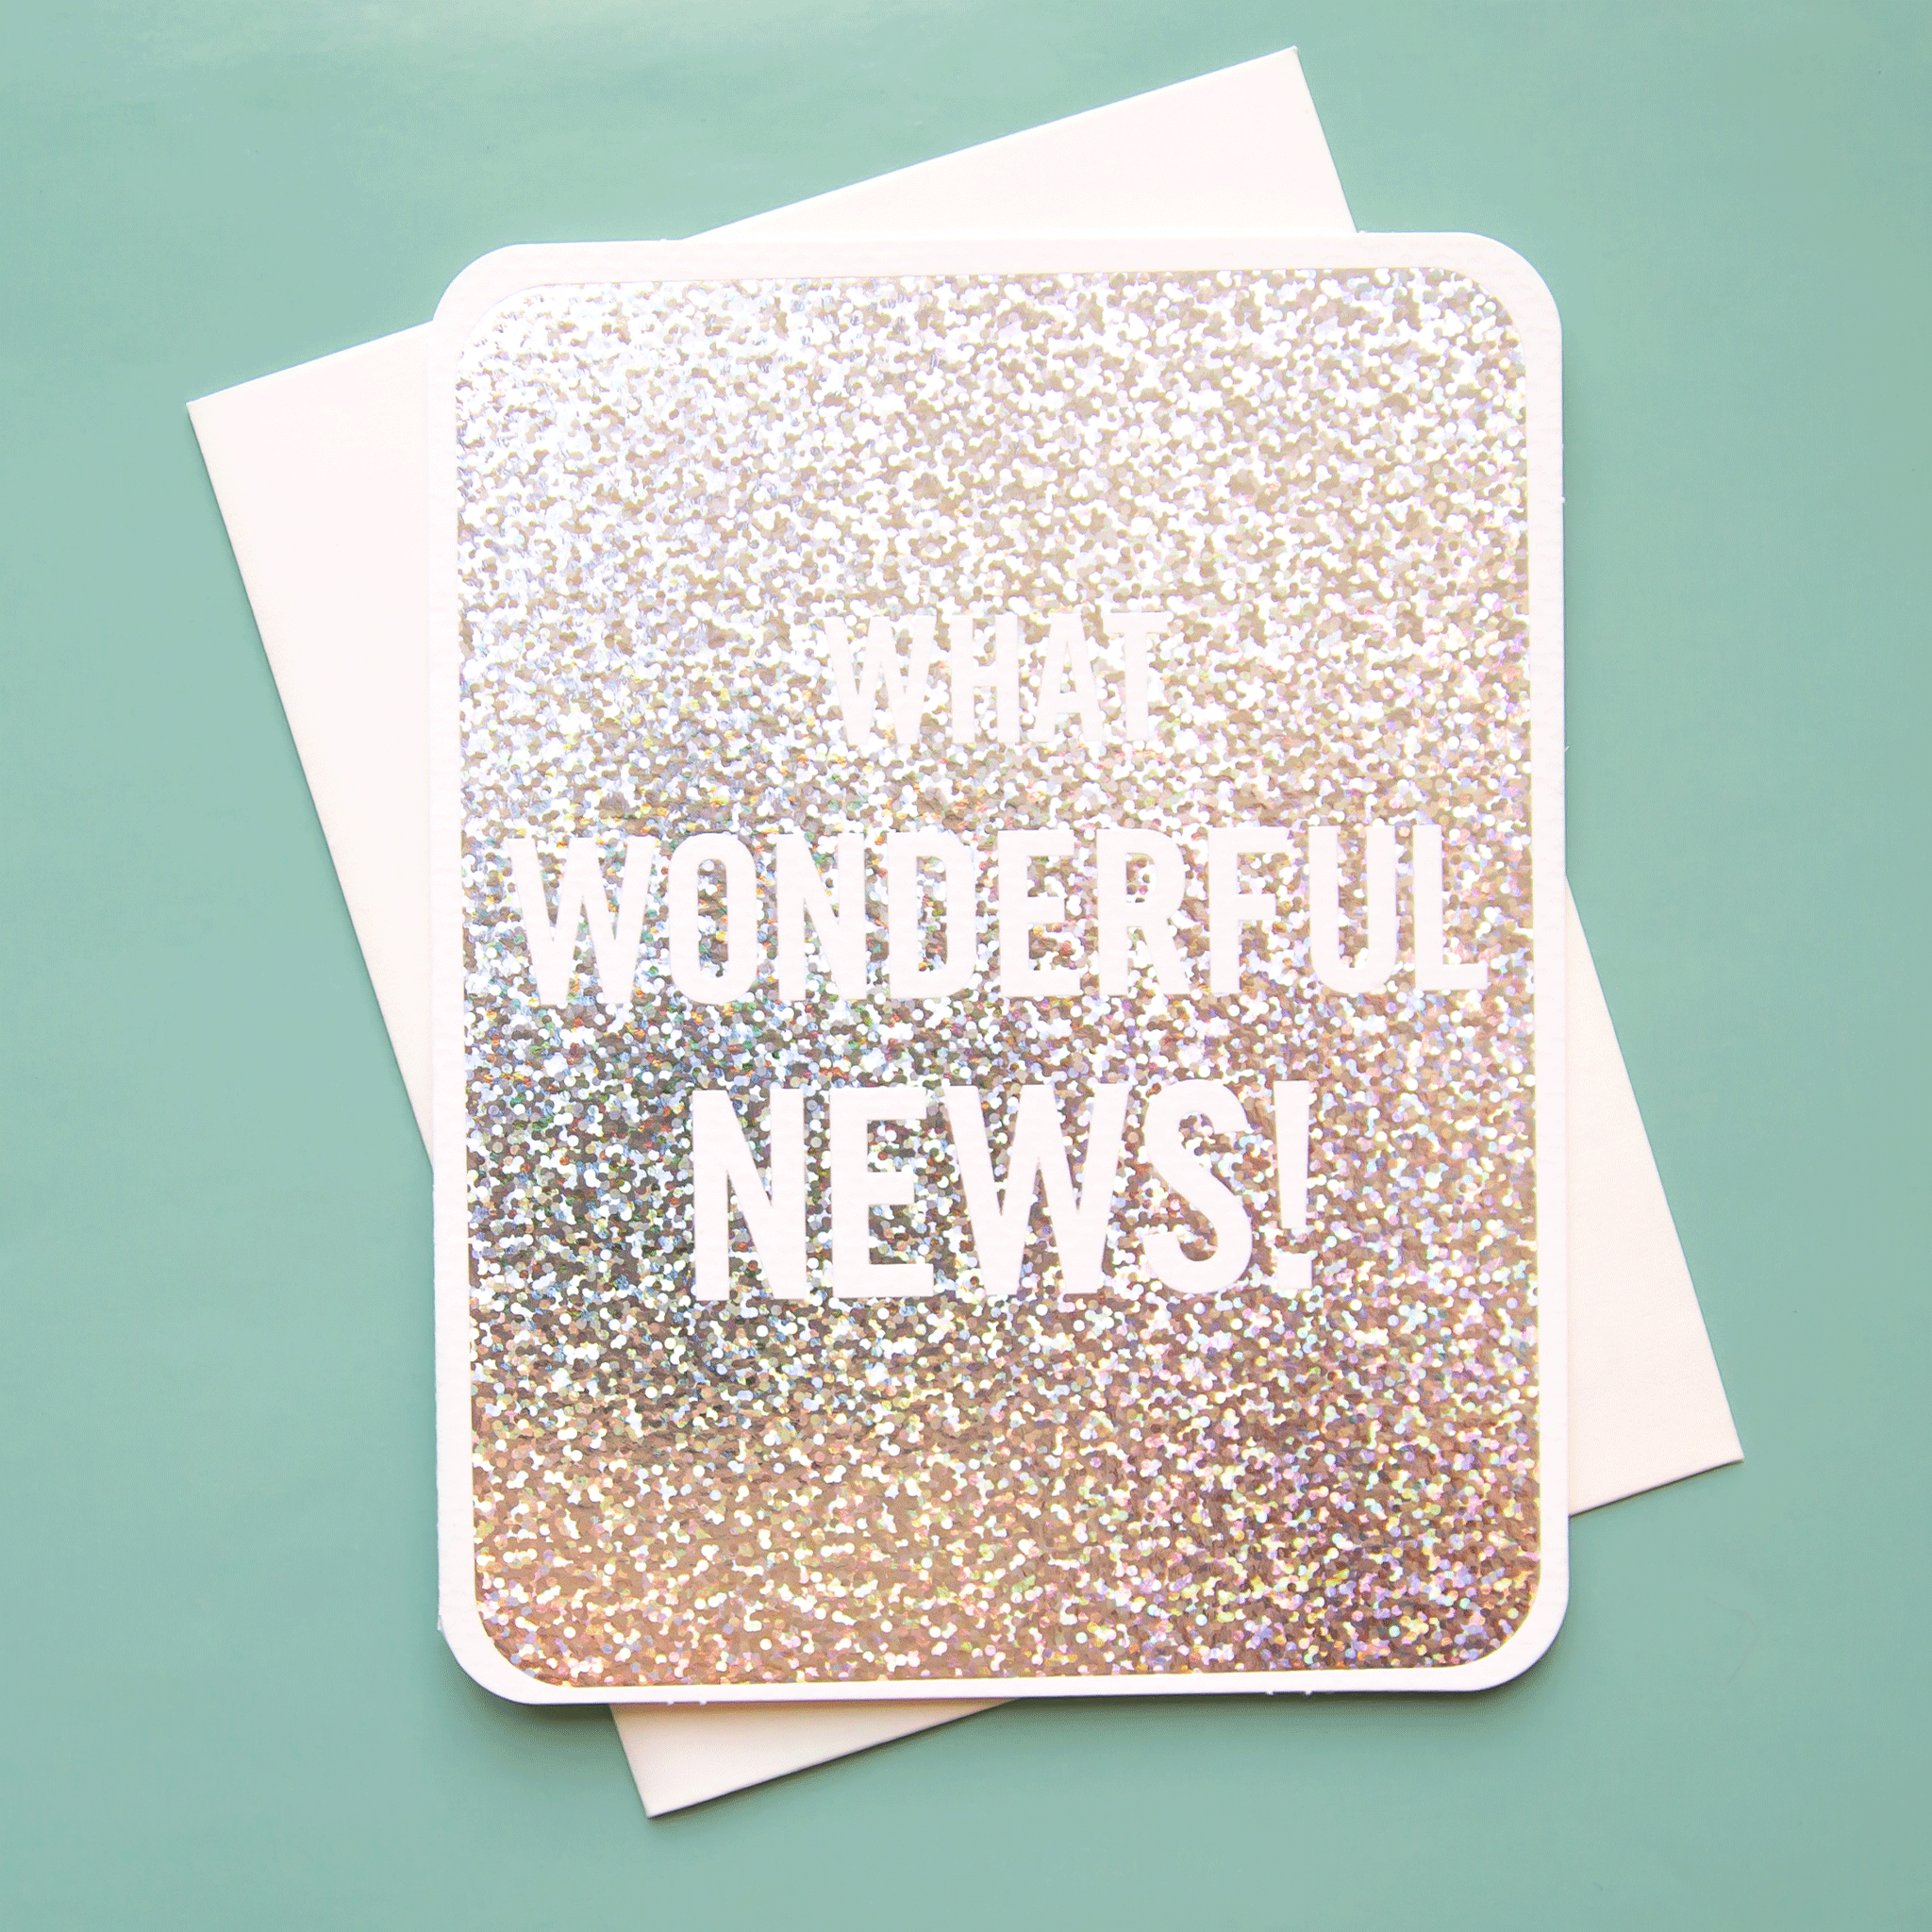 On a green background is a silver card with white text that reads, "What Wonderful News!". 